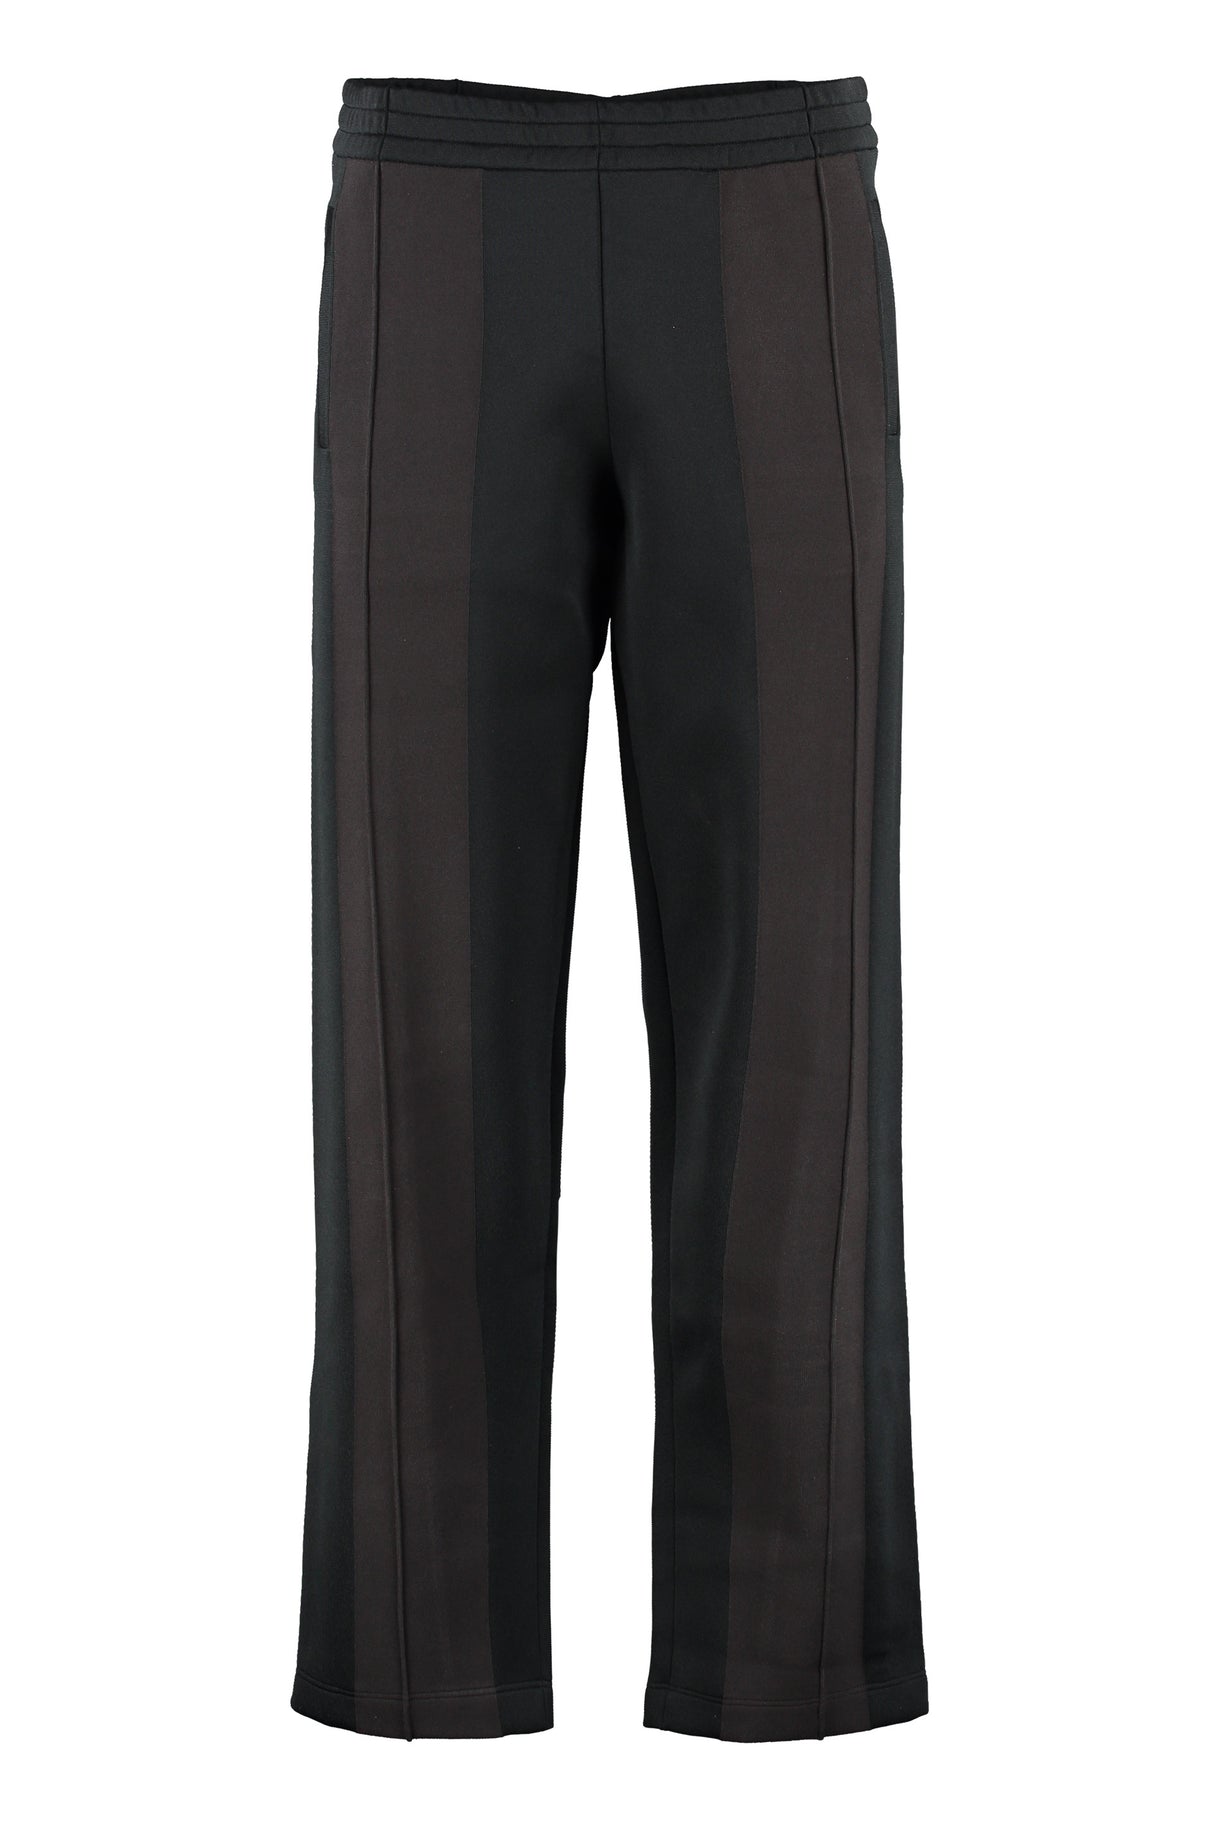 Black Technical Fabric Pants with Extendable Side Zipper